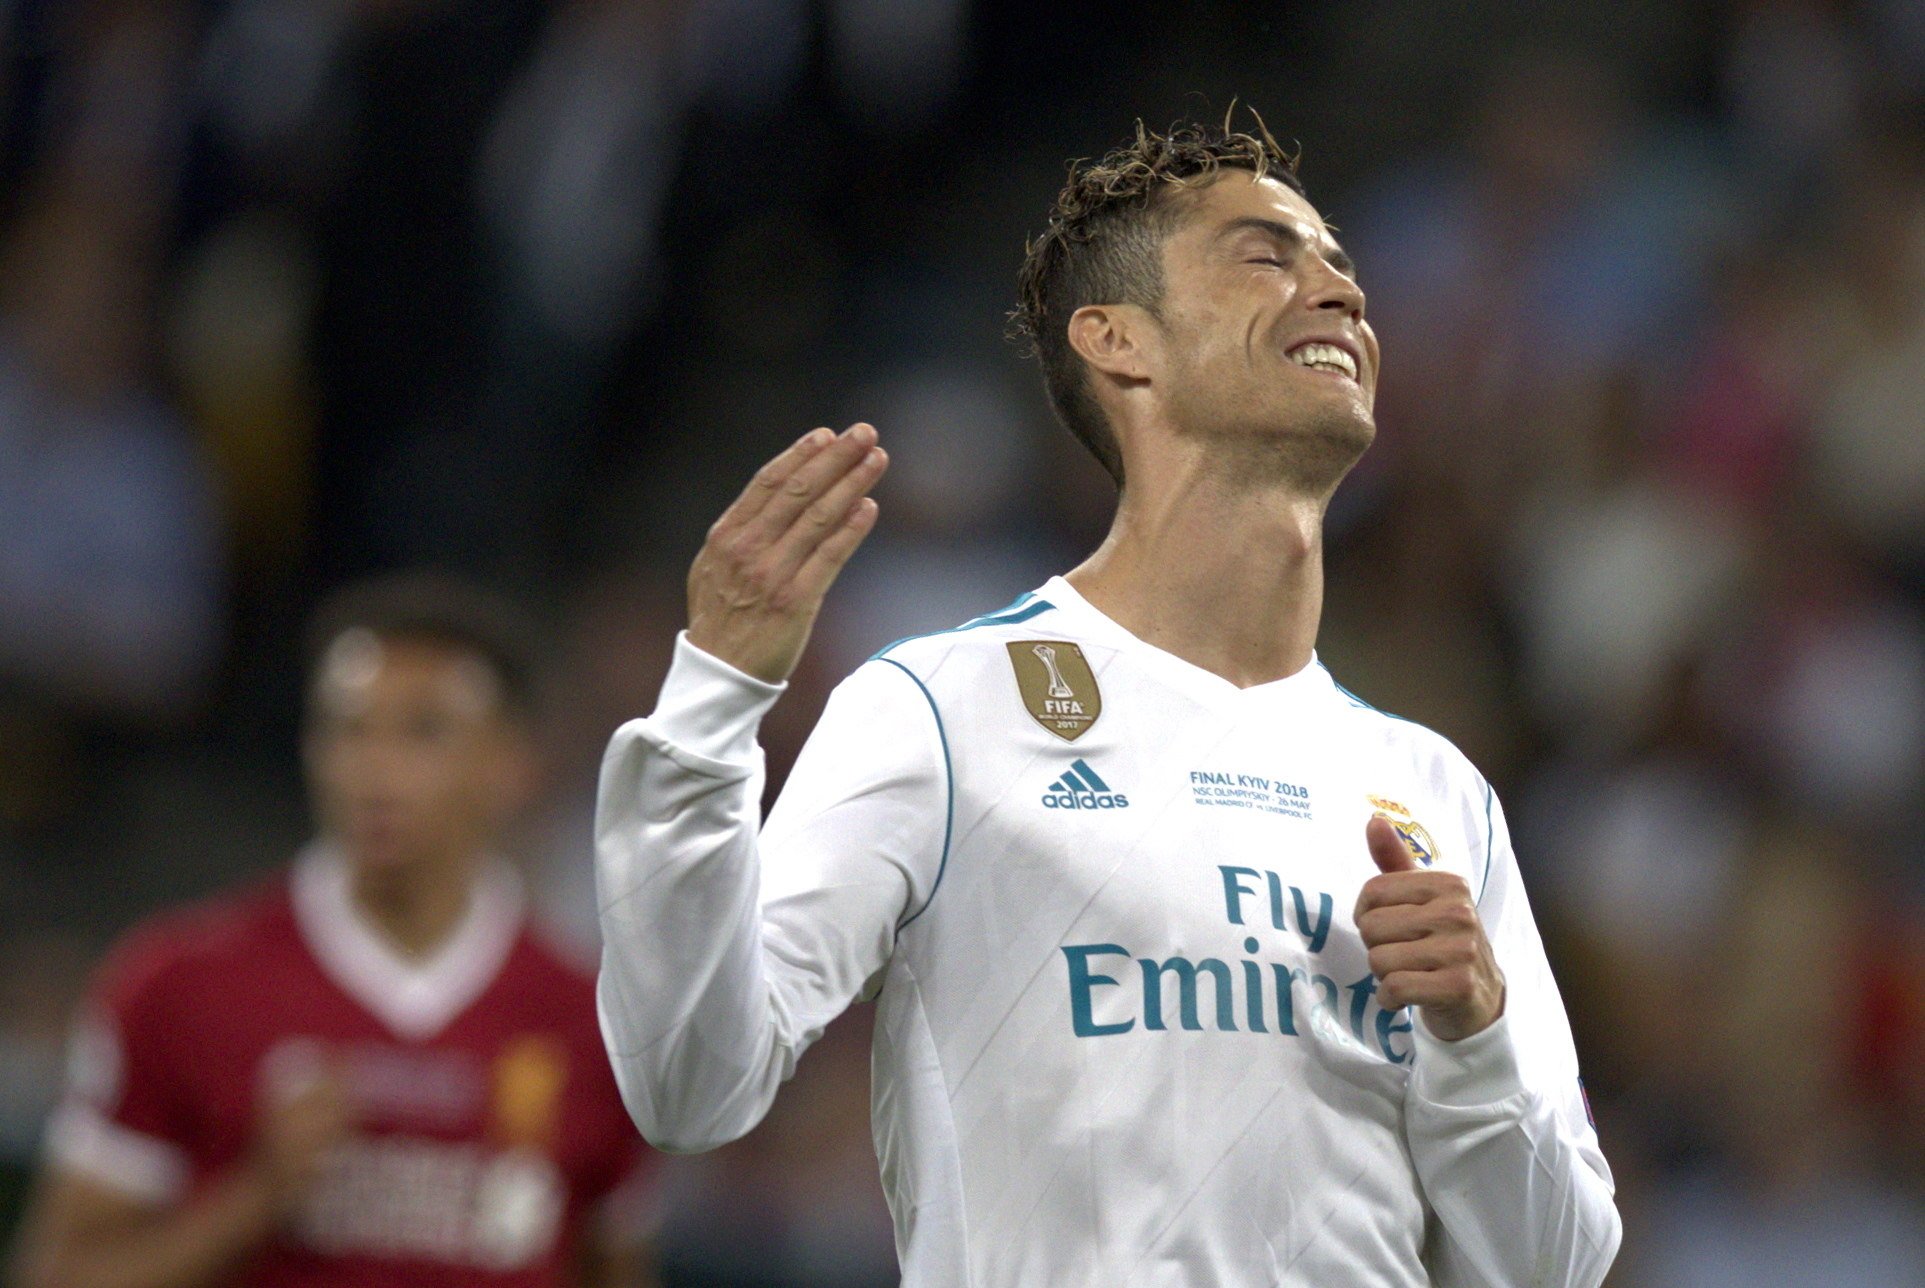 Ronaldo accepts two-year prison term, to pay 18.8 million euros to Spanish Tax Agency